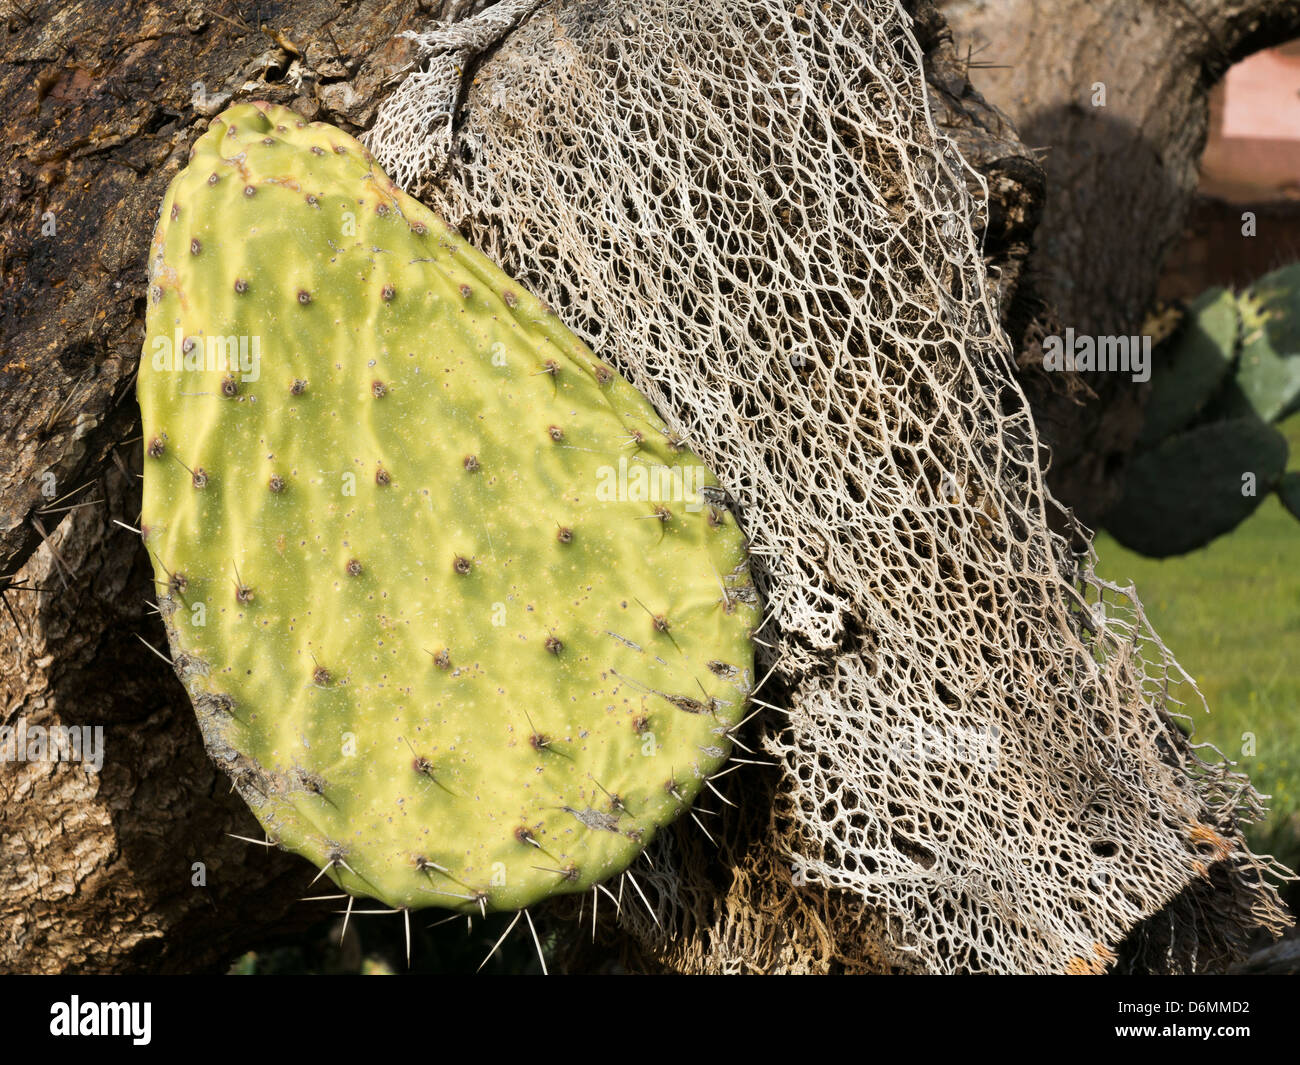 Prickly pear cactus growing in southern Morocco, North Africa Stock Photo